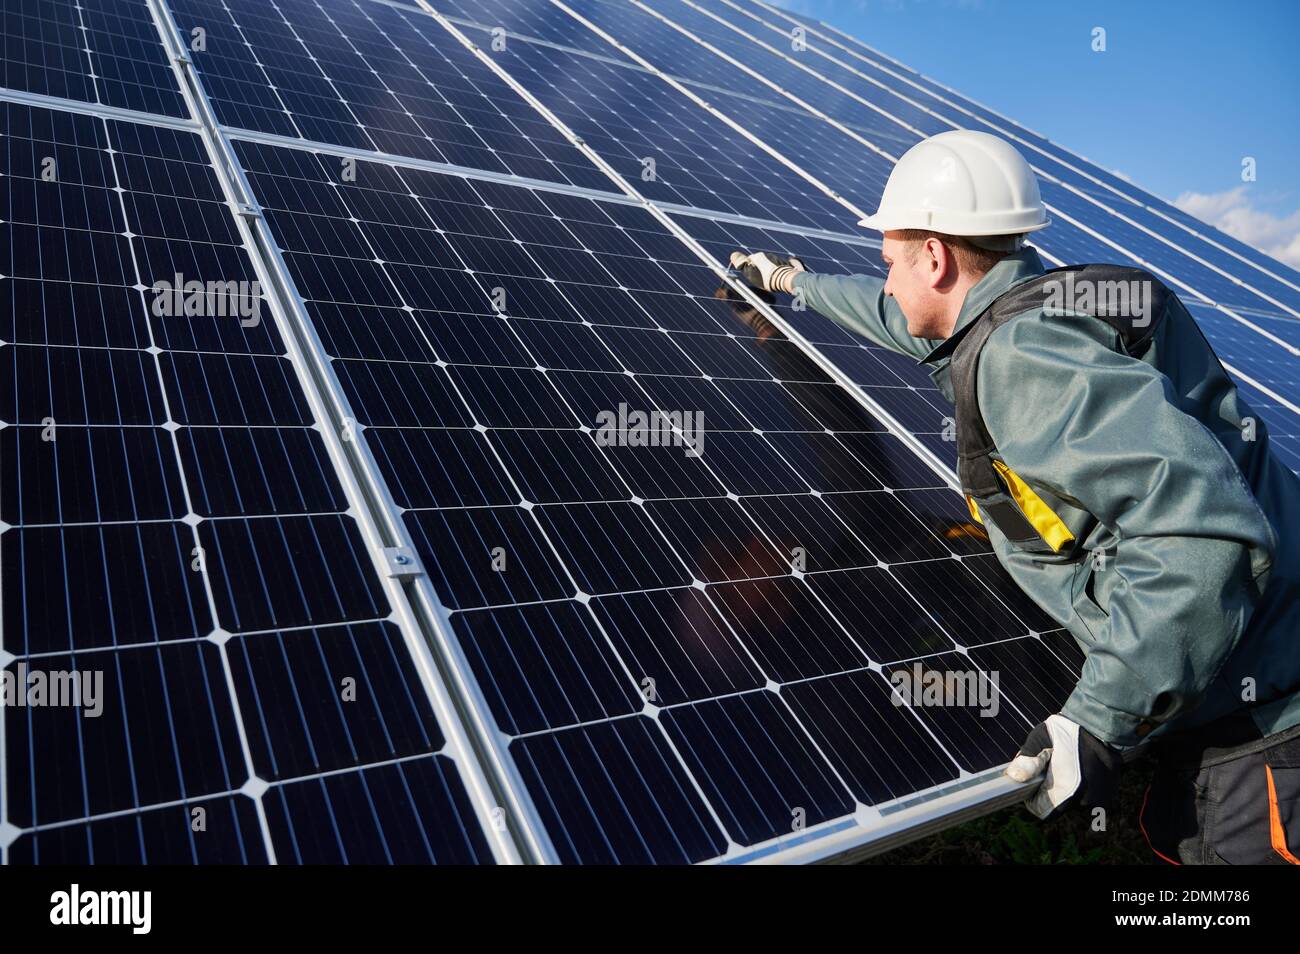 Man technician in safety helmet repairing photovoltaic solar module. Electrician in gloves maintaining solar photovoltaic panel system. Concept of alternative energy and power sustainable resources. Stock Photo